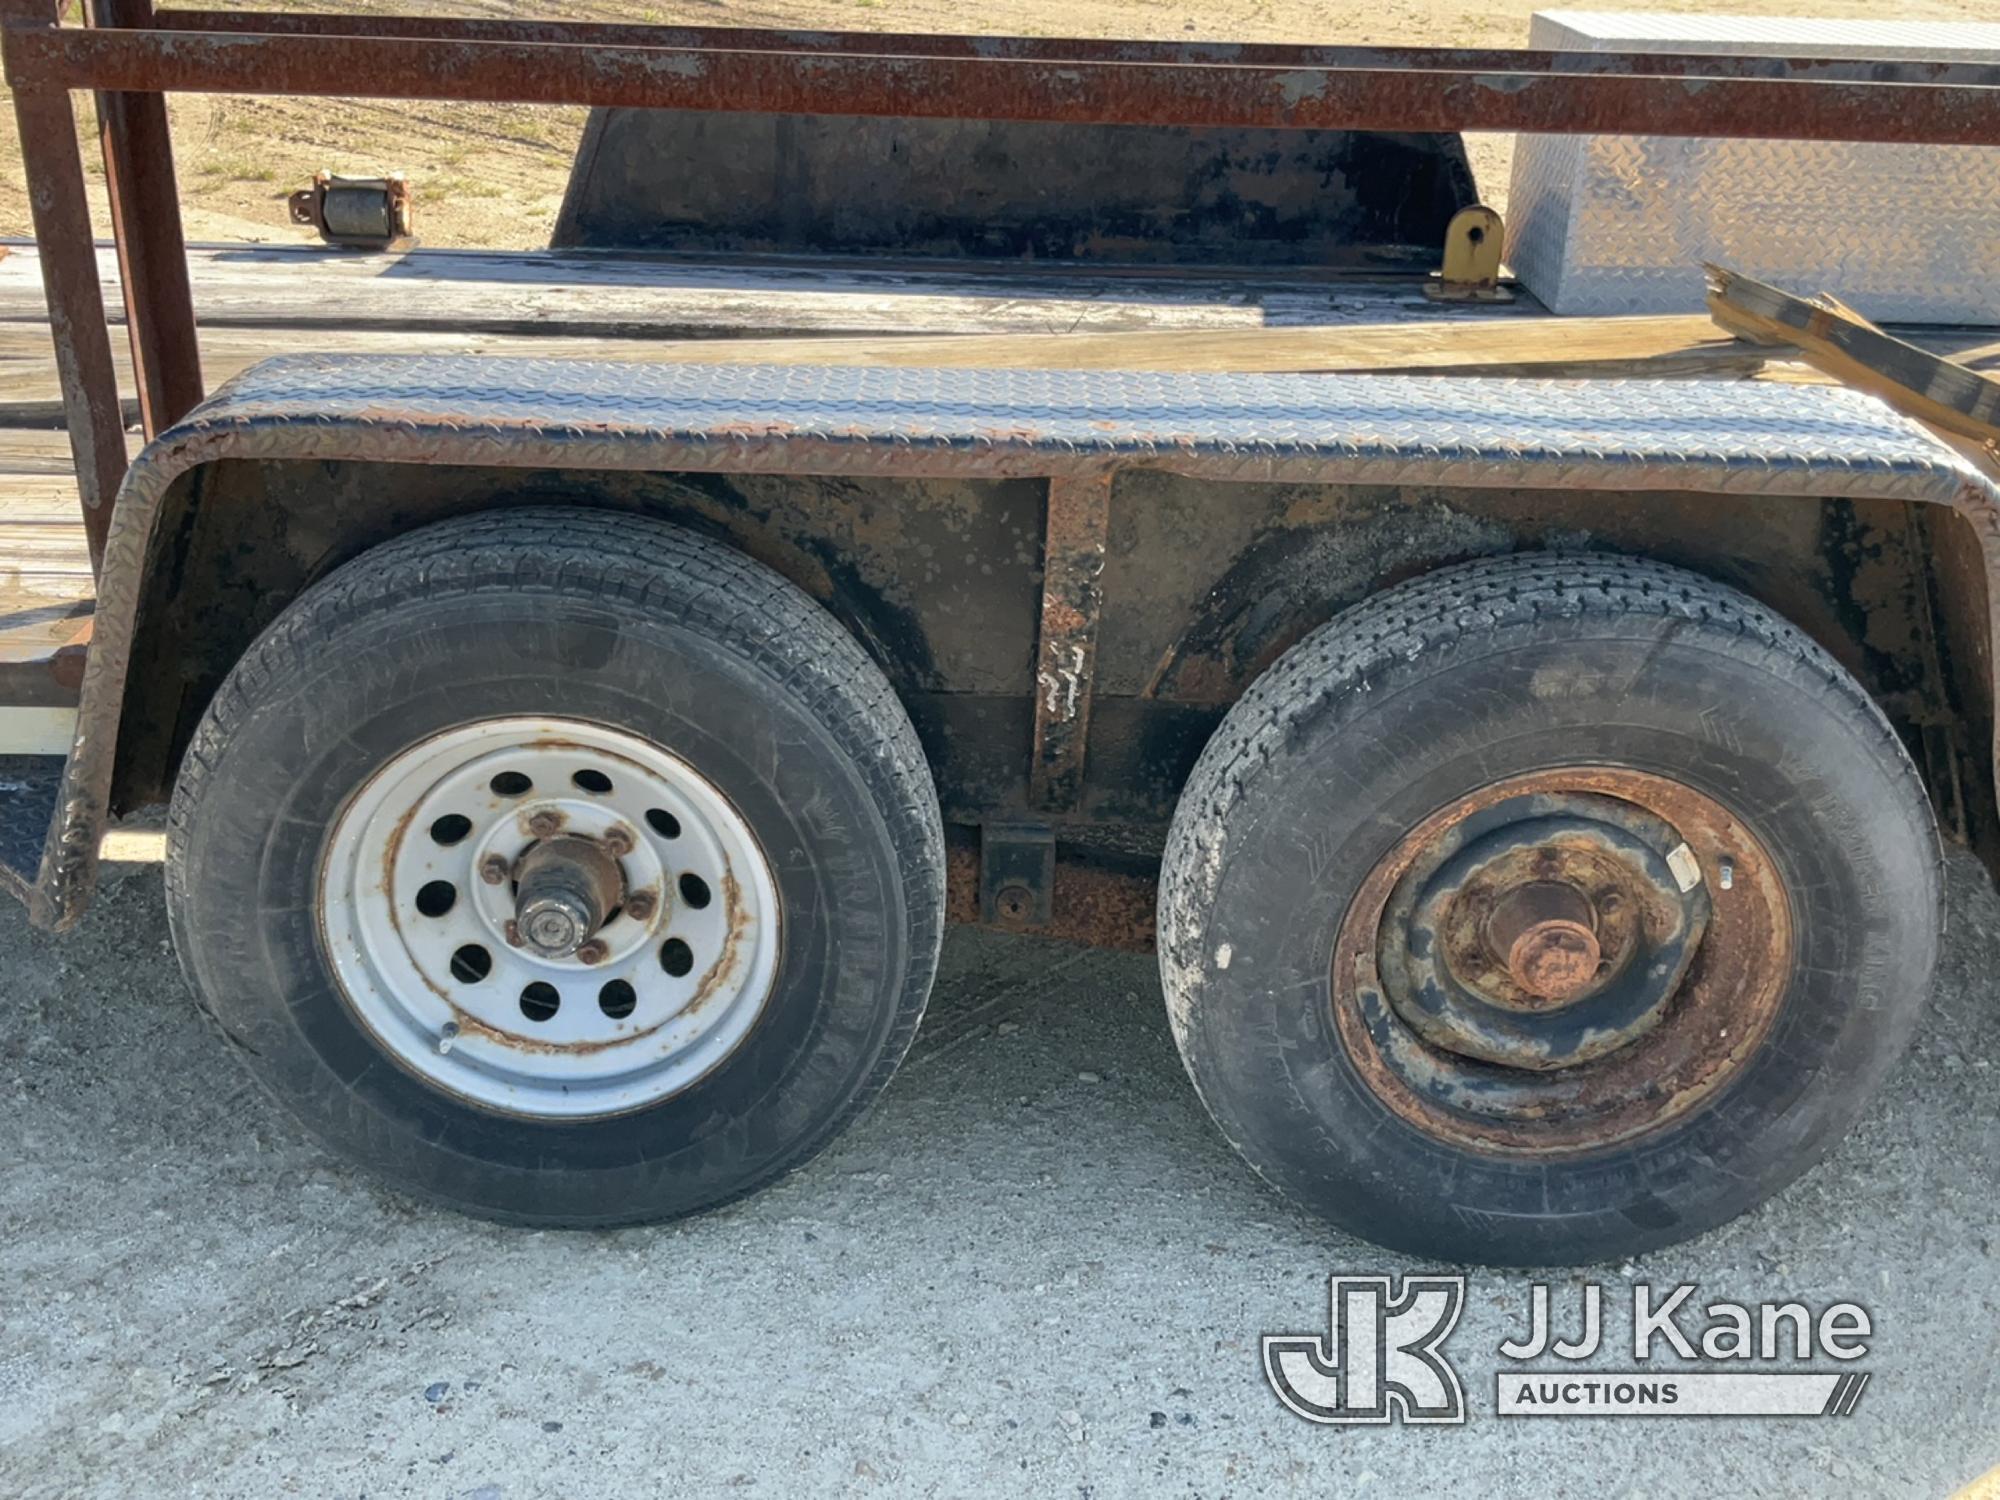 (Charlotte, MI) 2005 Brim T/A Tagalong Flatbed Trailer Rotted Deck Boards